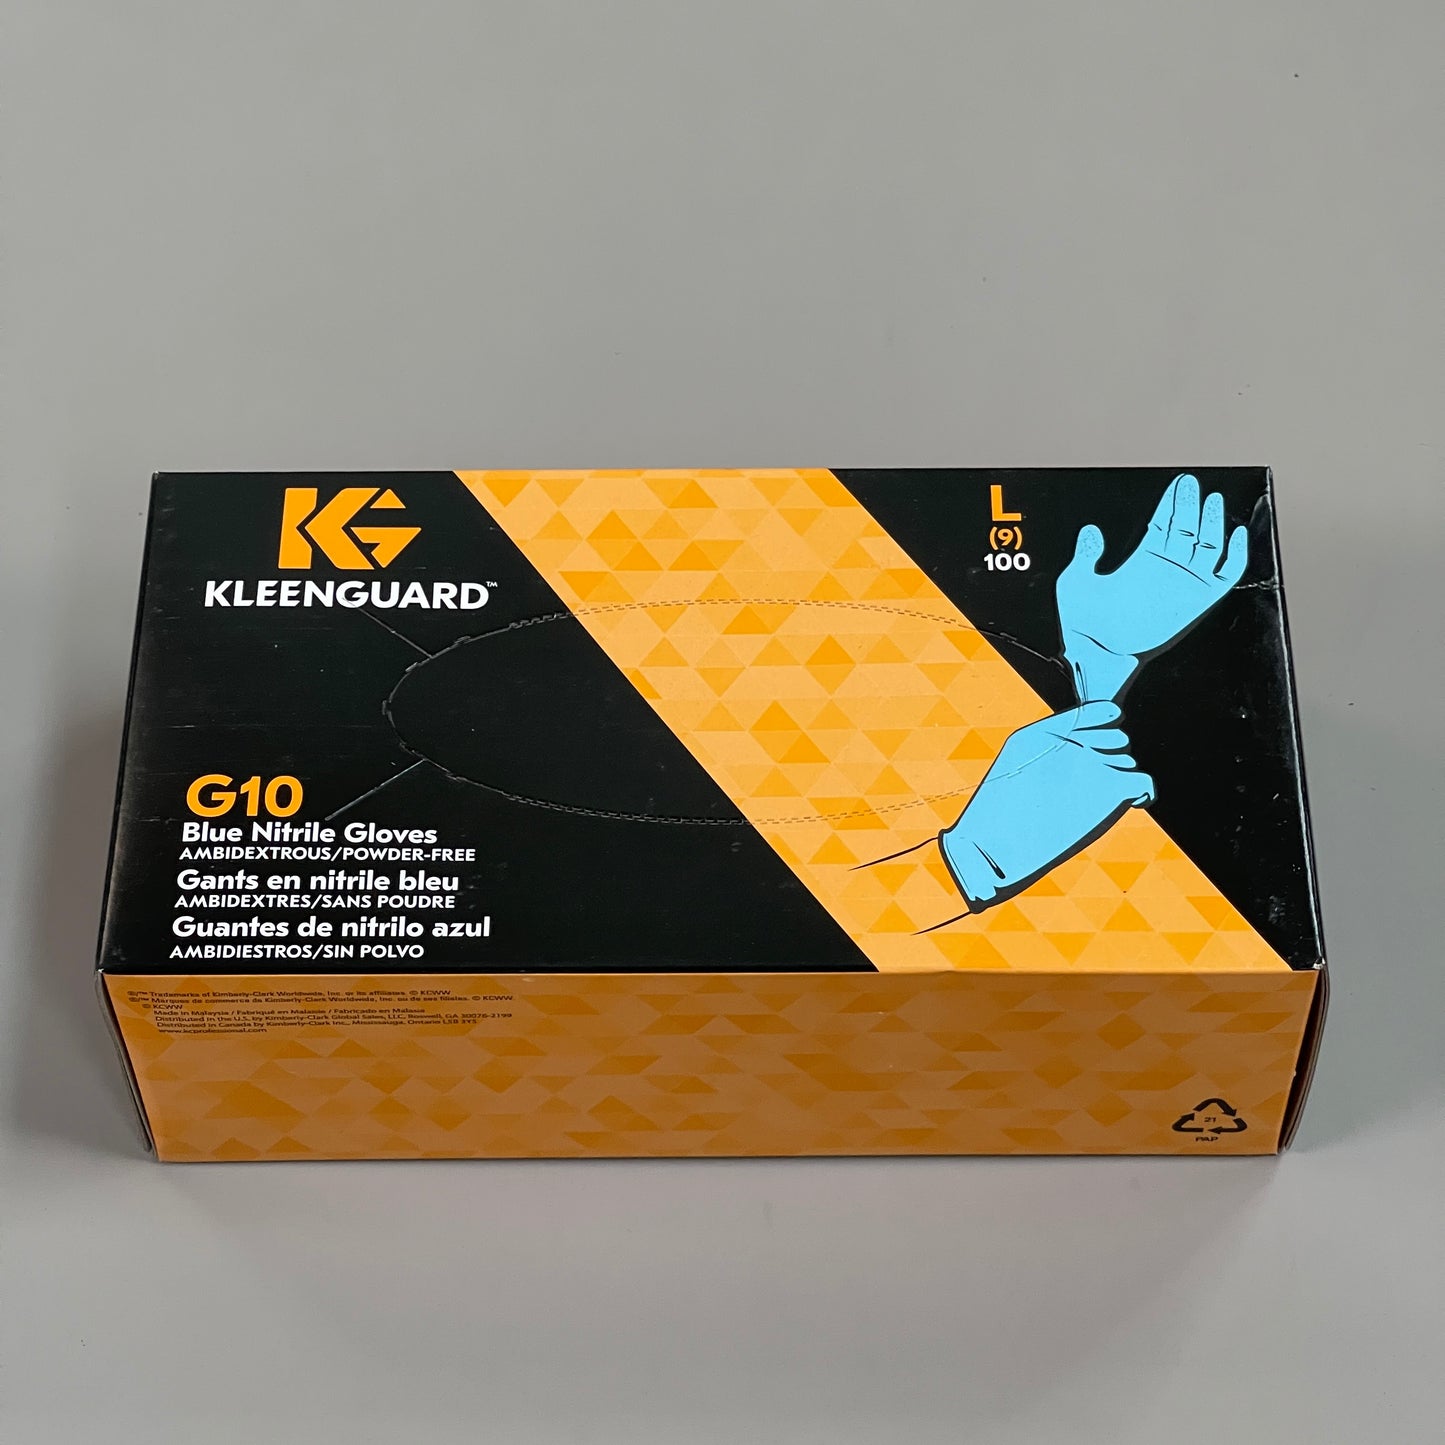 KLEENGUARD KIMBERLY-CLARK Professional Protective Nitrile Gloves 1 CASE (1000 CT) Sz L 57373 (New)